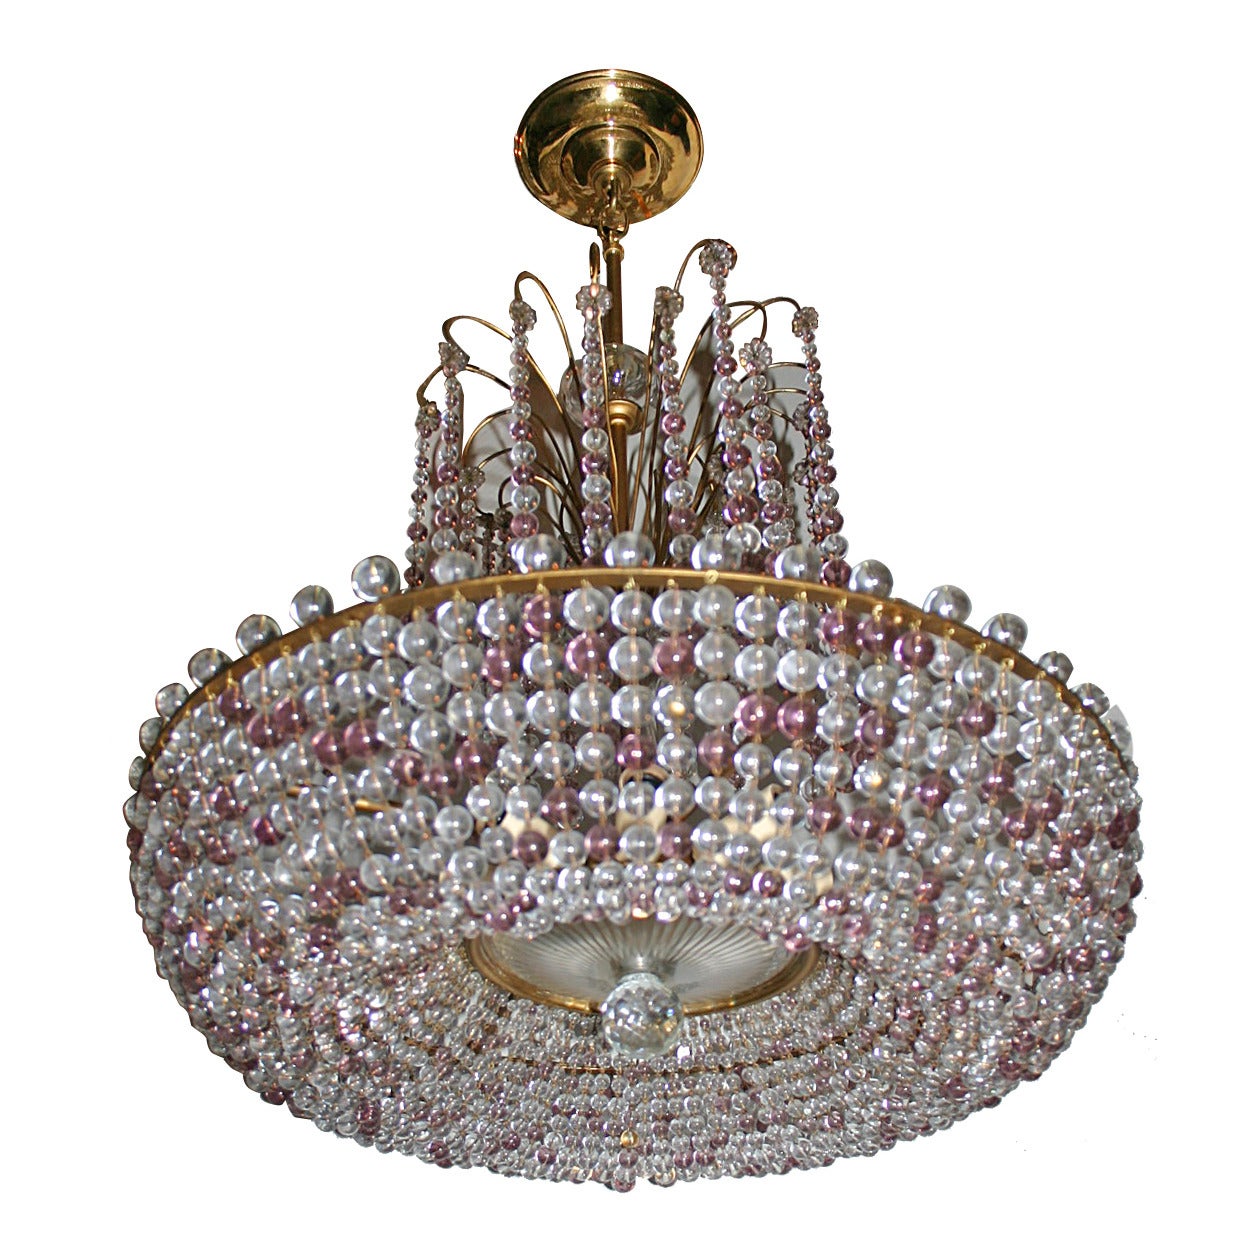 A circa 1940 French crystal chandelier with amethyst and clear crystals, interior lights.
Measurements:
21